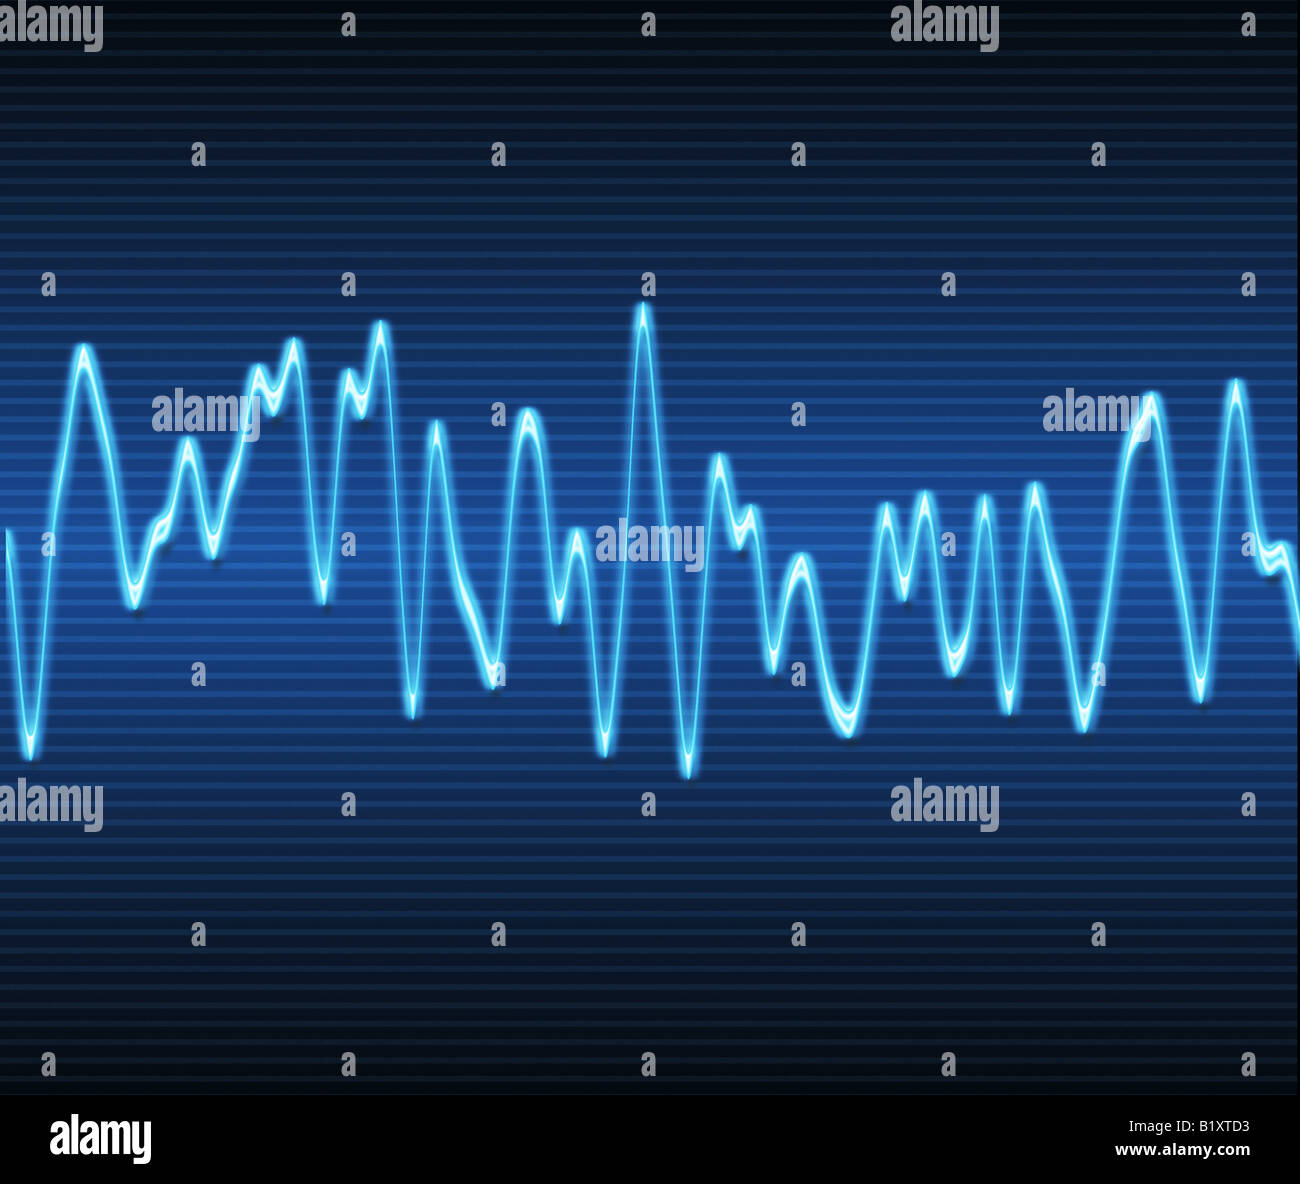 large image of an electronic sine sound or audio wave Stock Photo